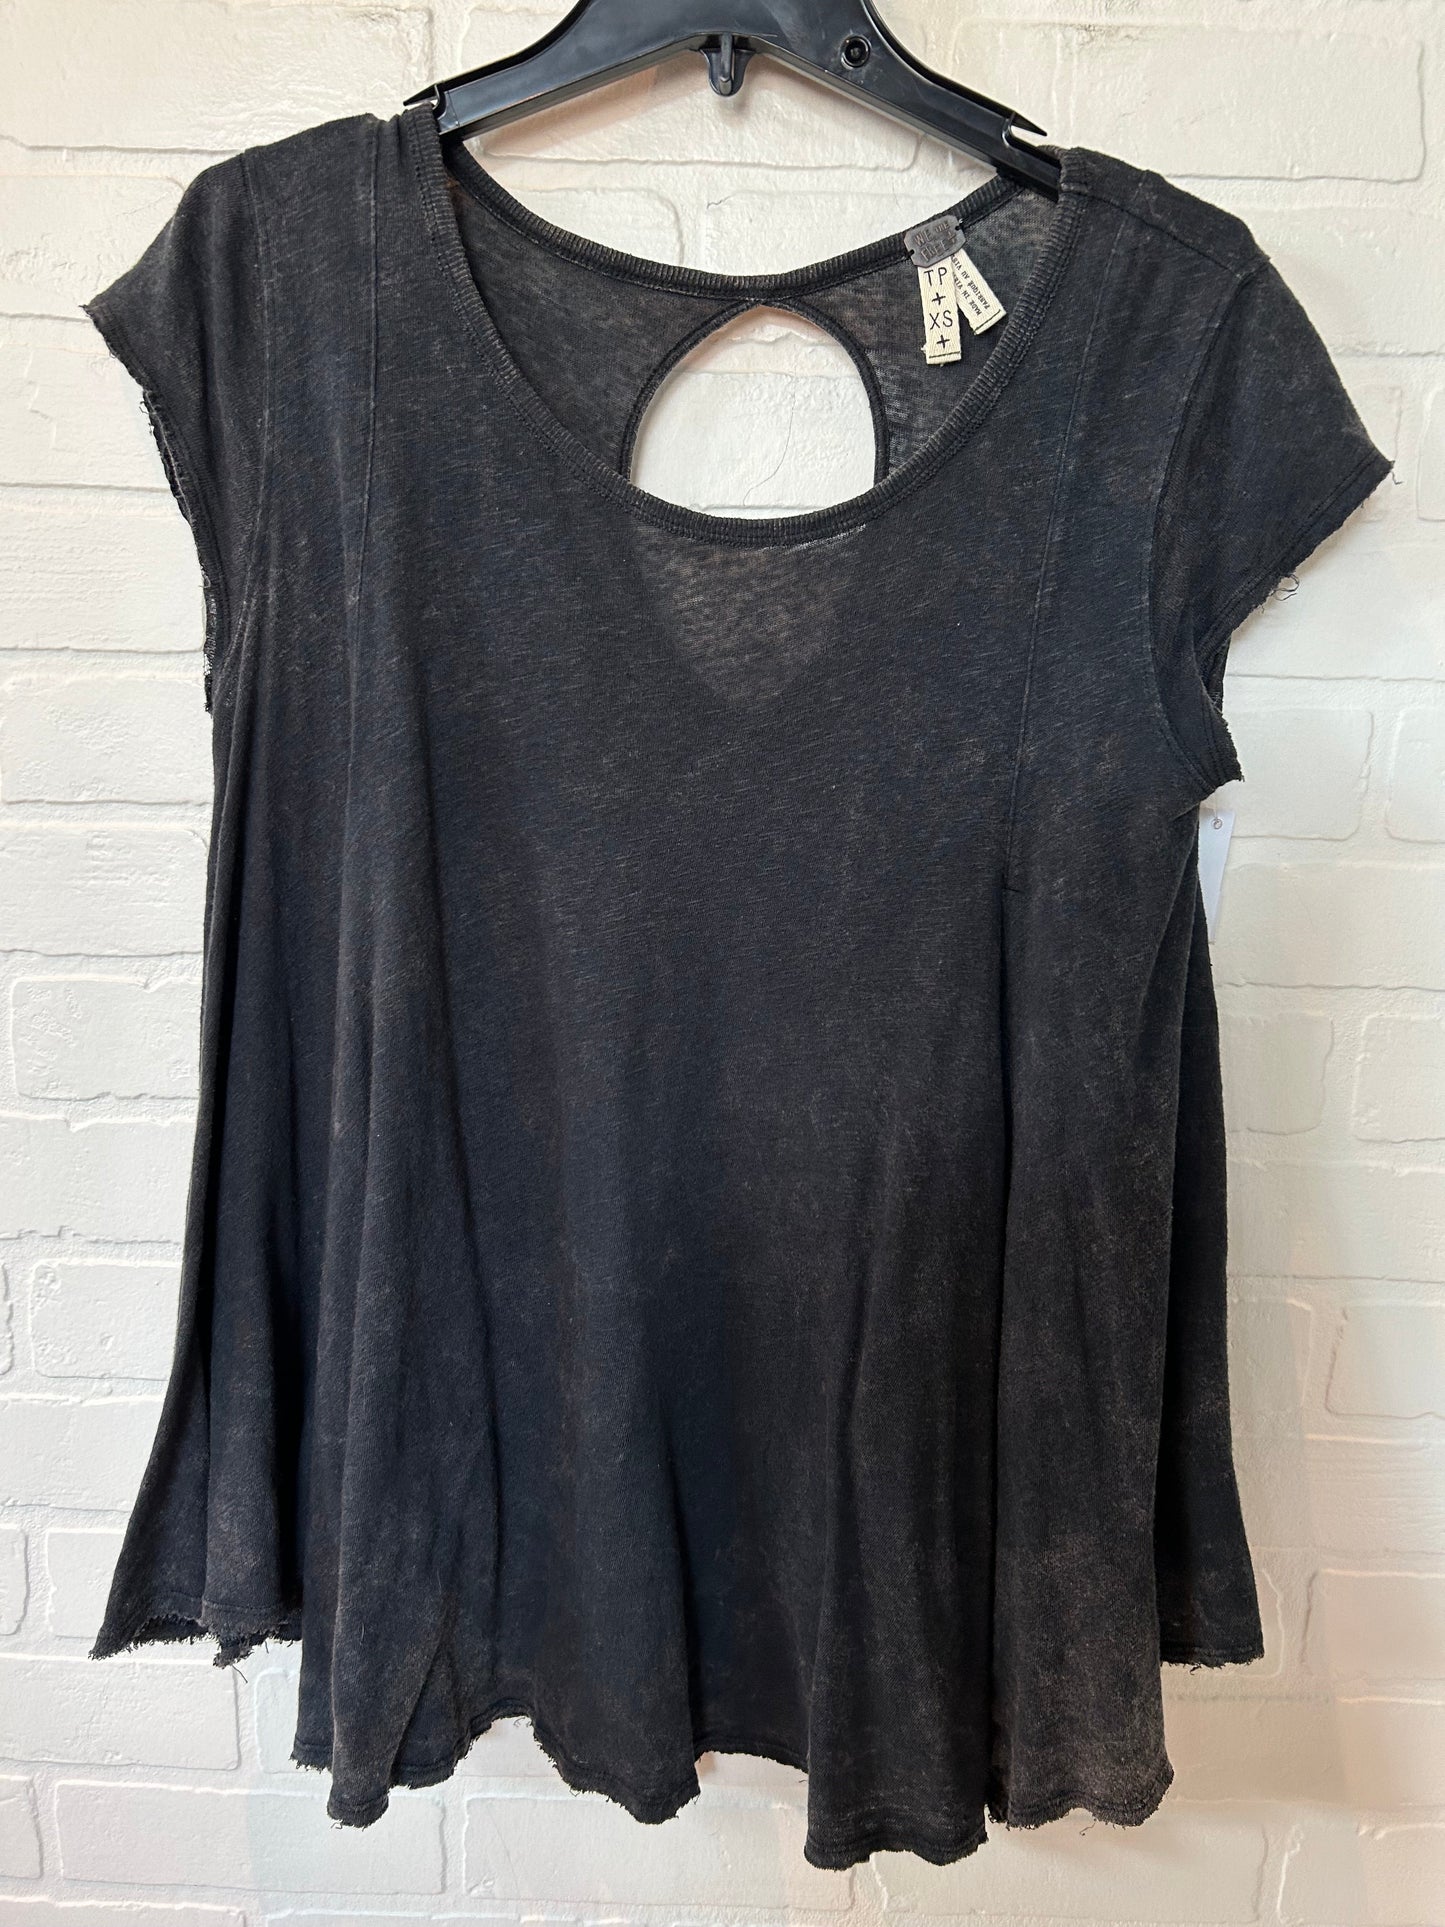 Black Top Short Sleeve Free People, Size Xs